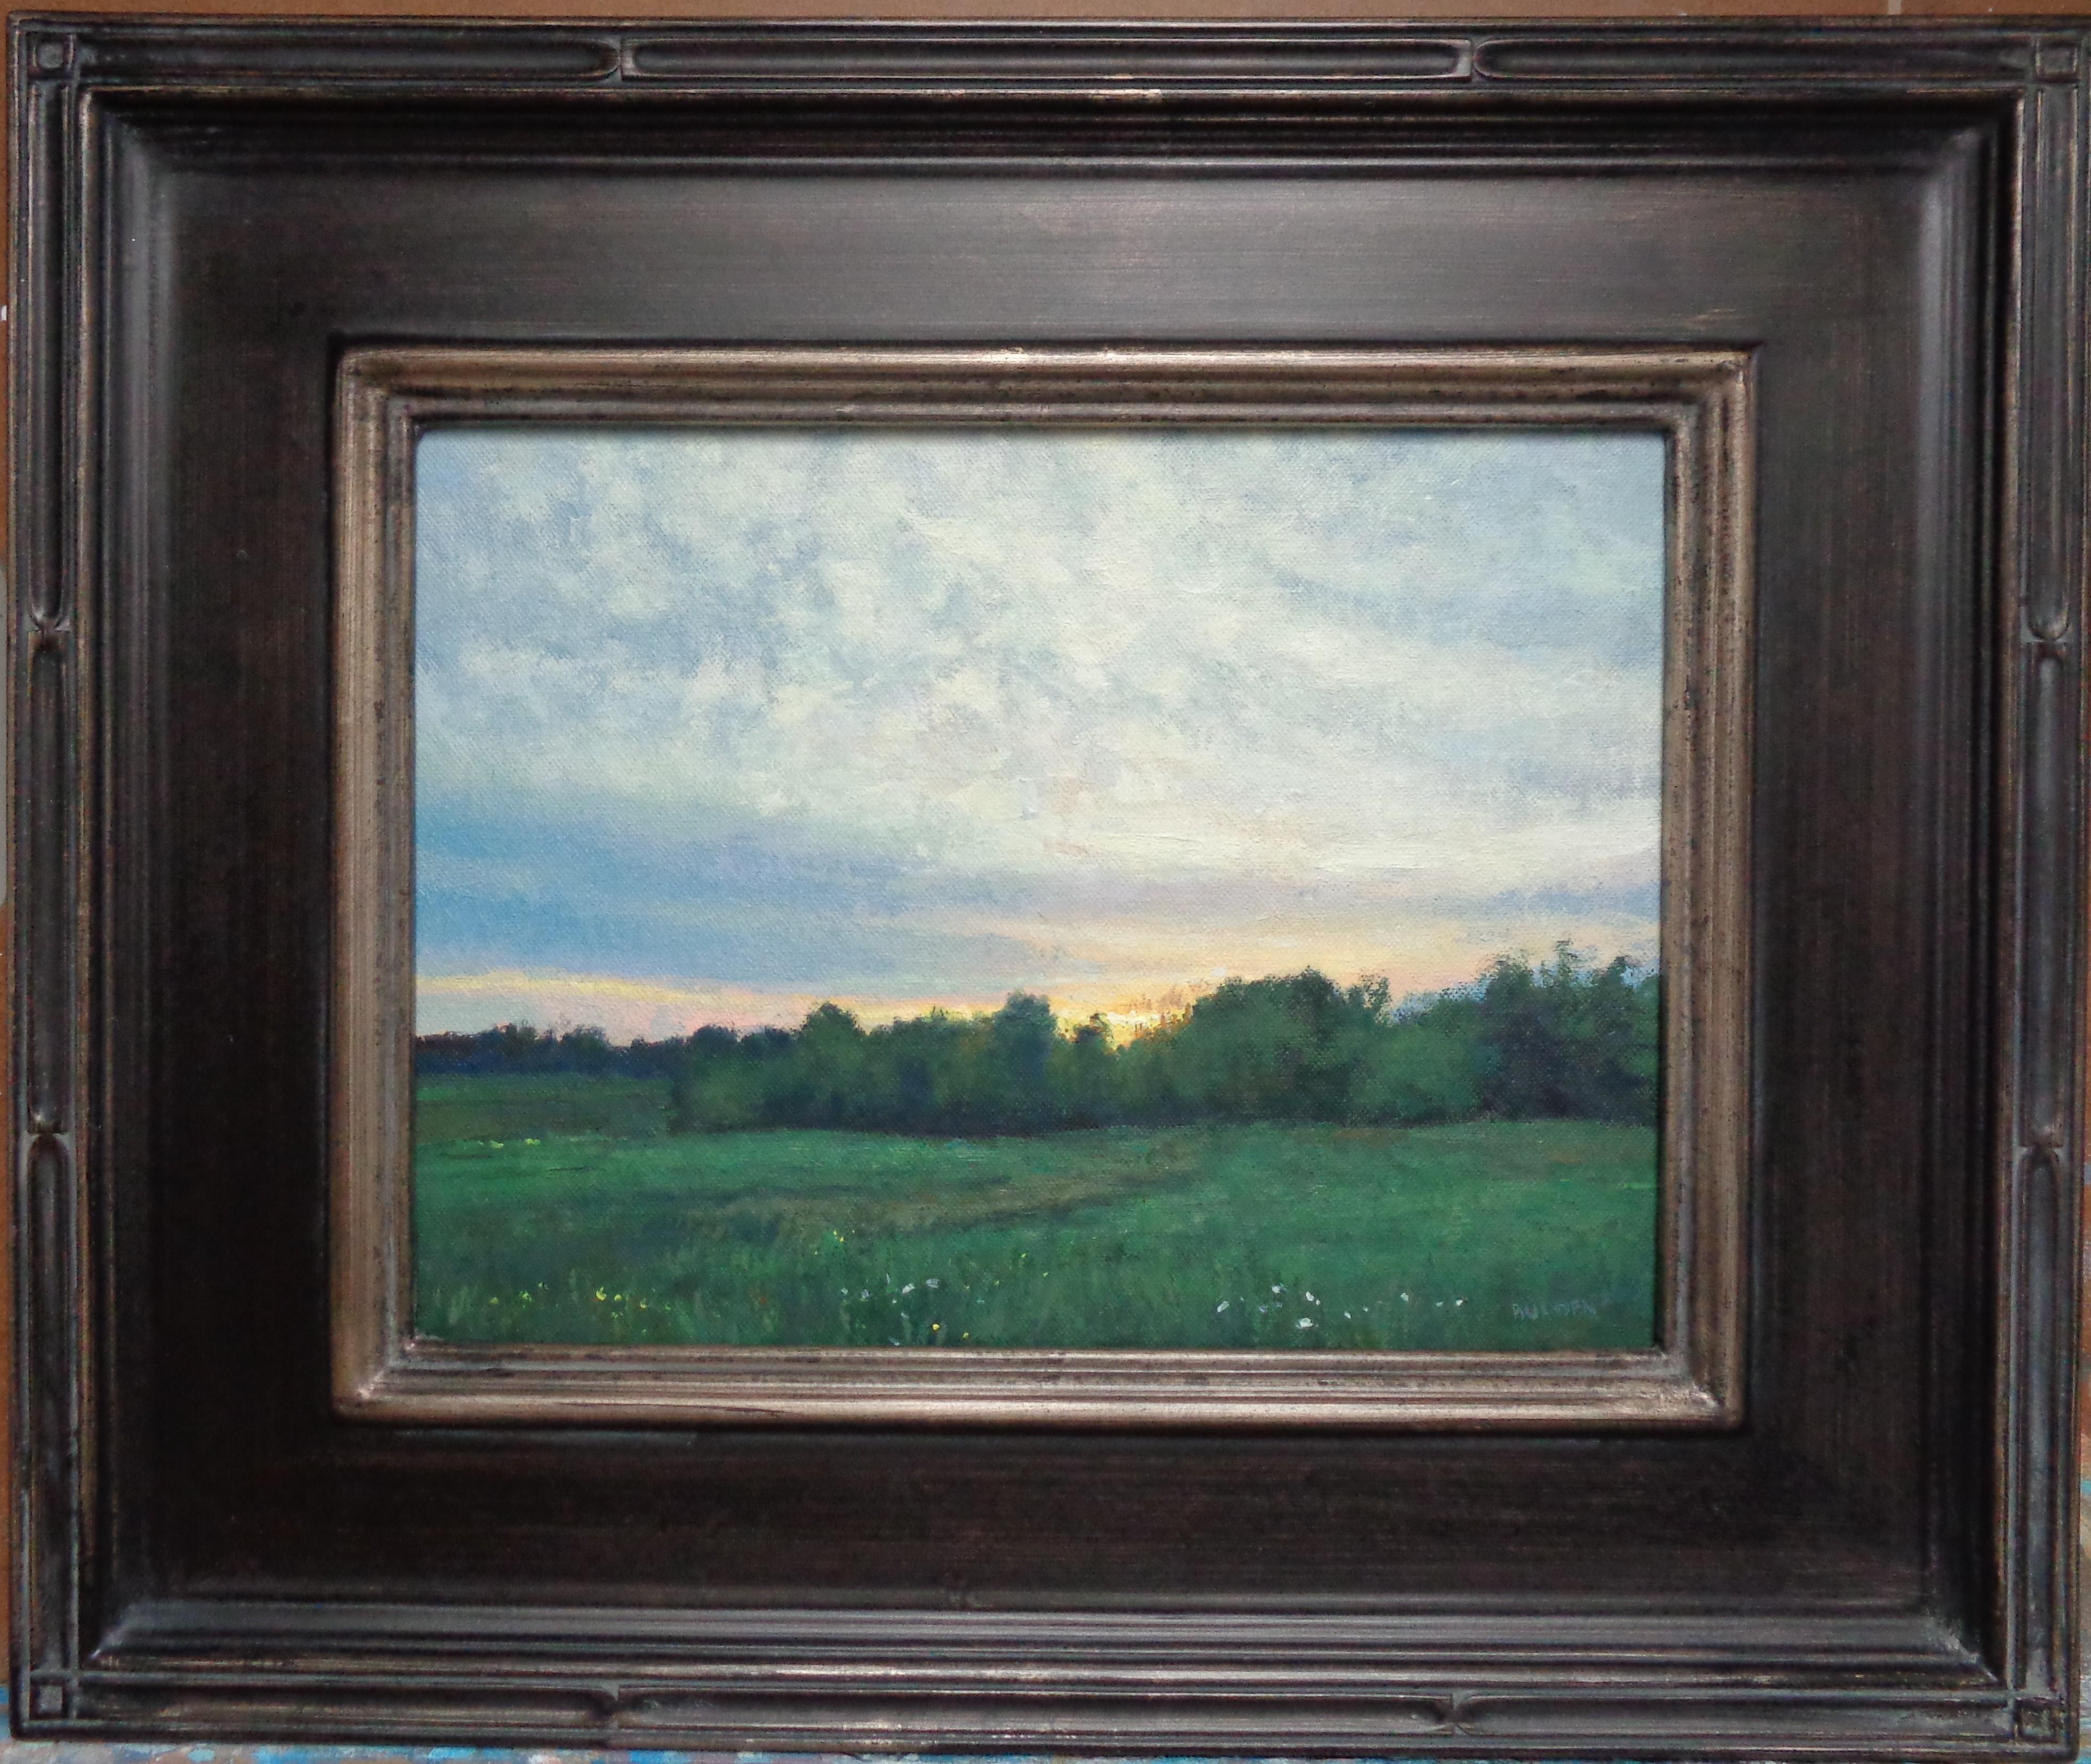 Morning  Sky
oil/panel
9 x 12 unframed, 15.5 x 18.5 framed
Morning Sky is a new oil on panel painting just completed in the studio. The painting exudes the rich qualities of oil paint with bright strong color, a variety of lost and found edges,